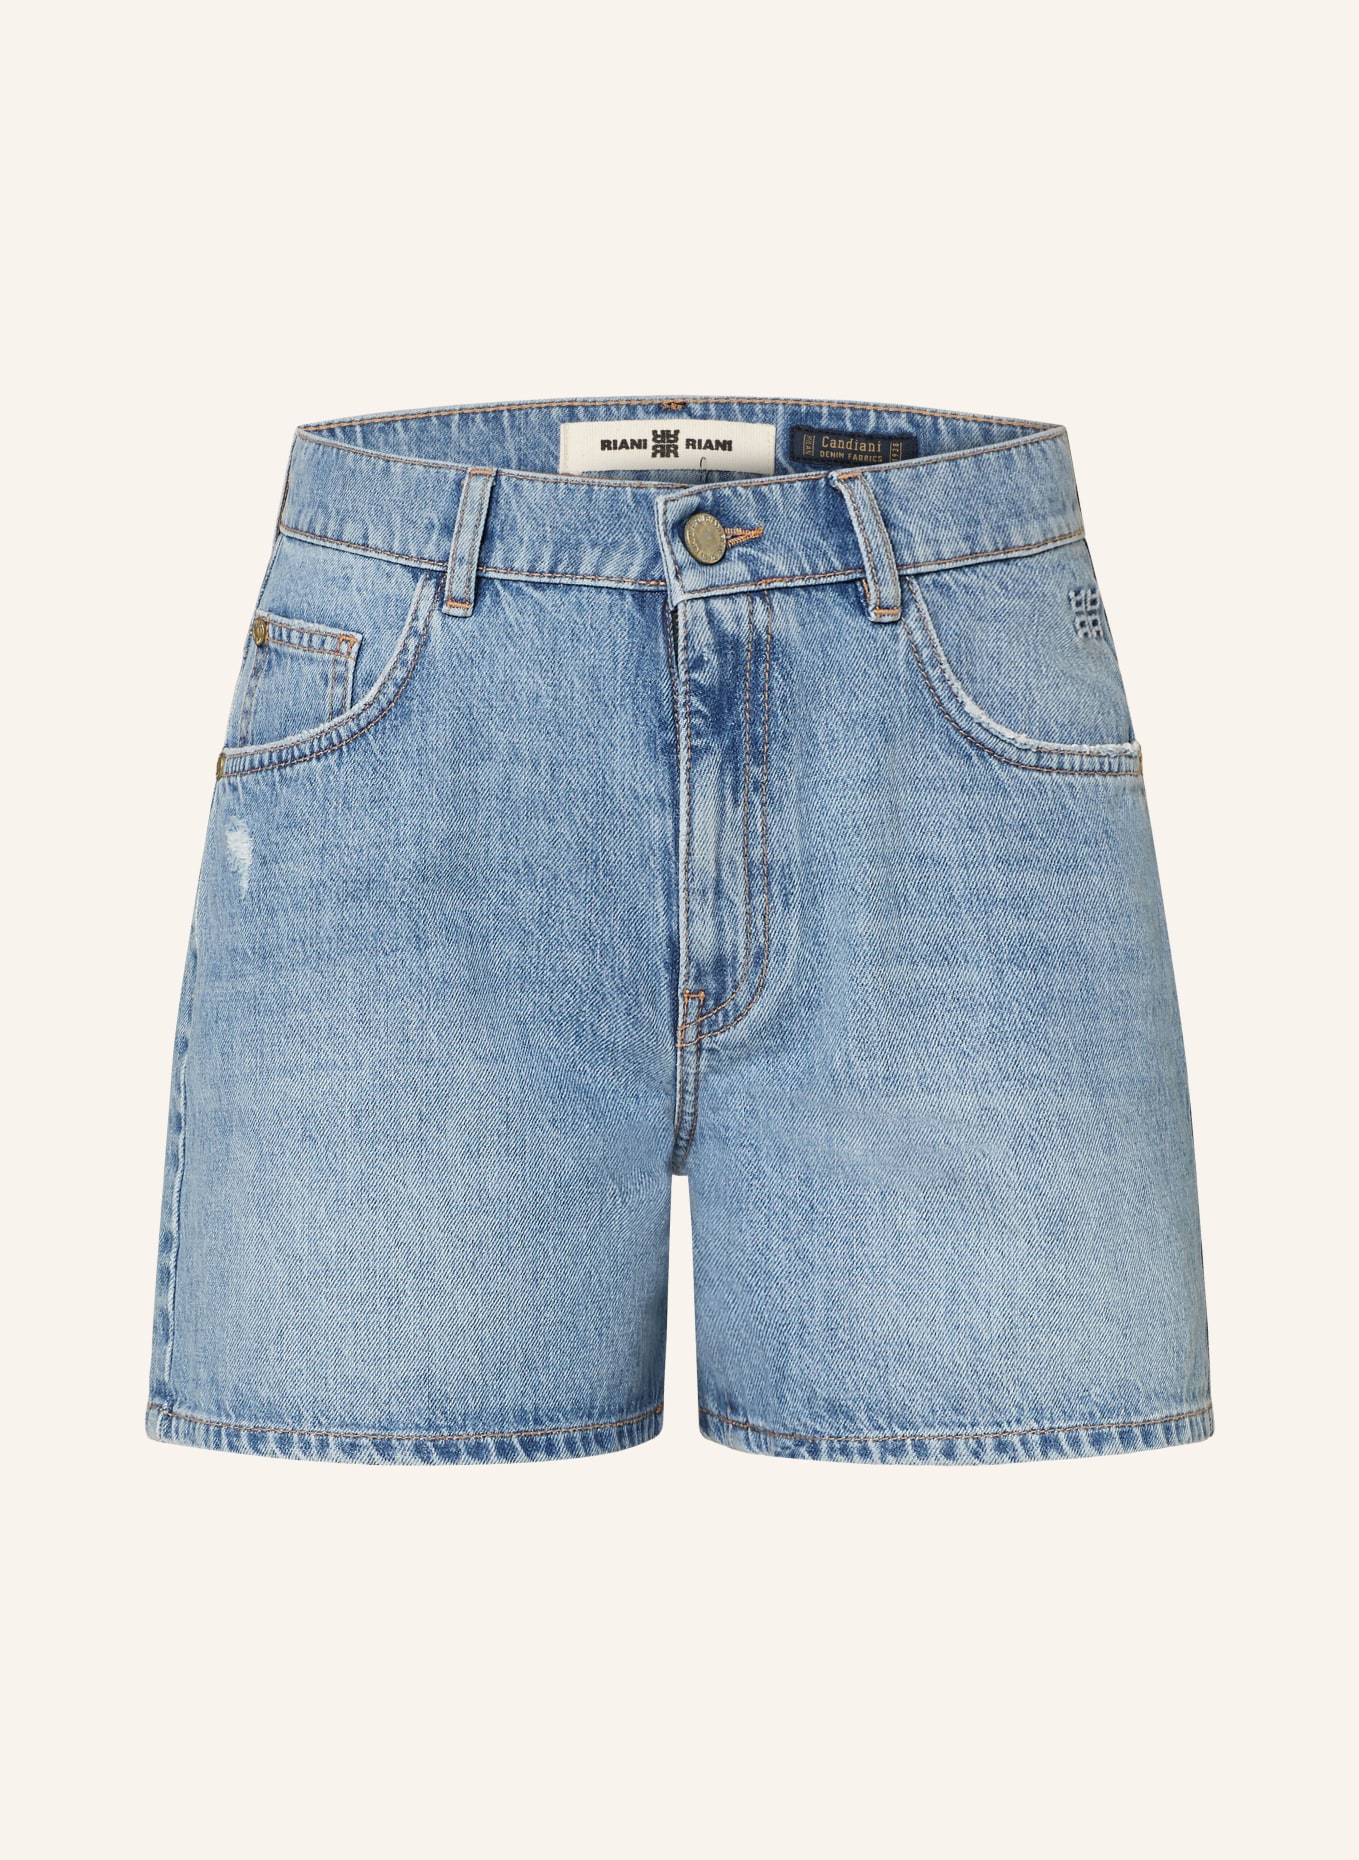 RIANI Jeansshorts, Farbe: 410 bleached blue scratched (Bild 1)